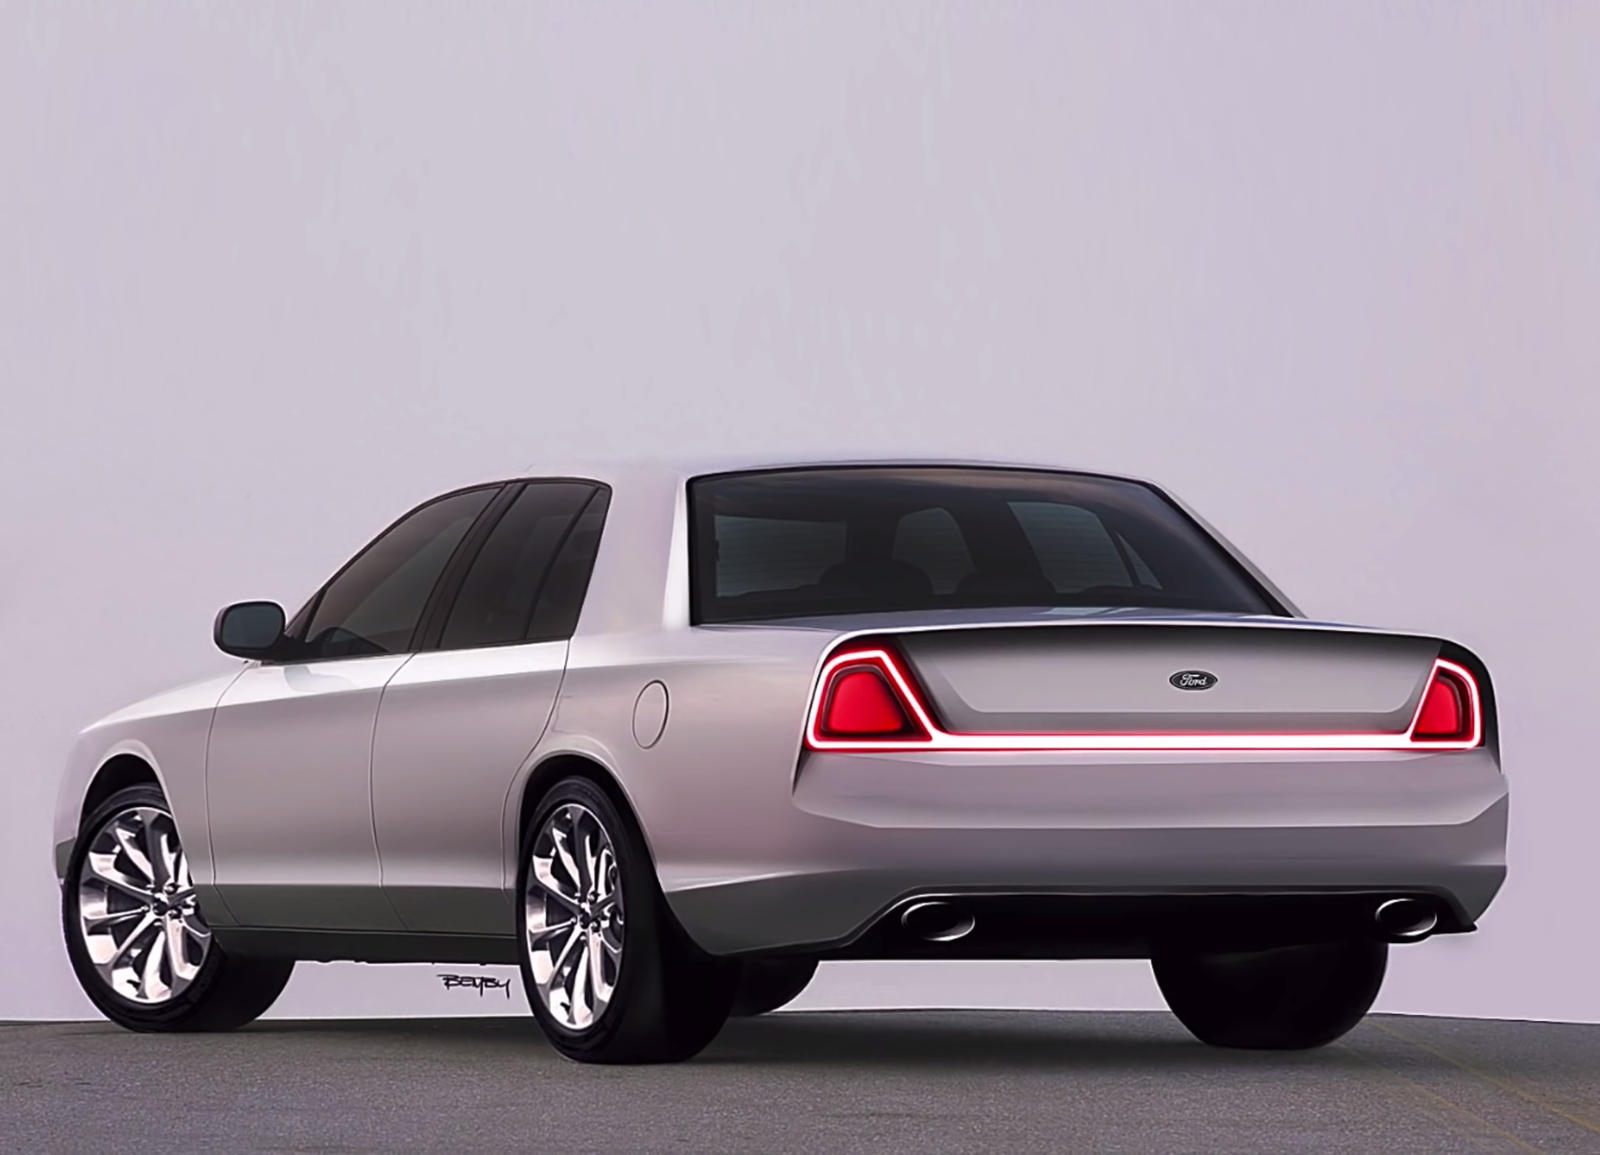 Should Ford Build A New Crown Victoria That Looks Like This Carbuzz